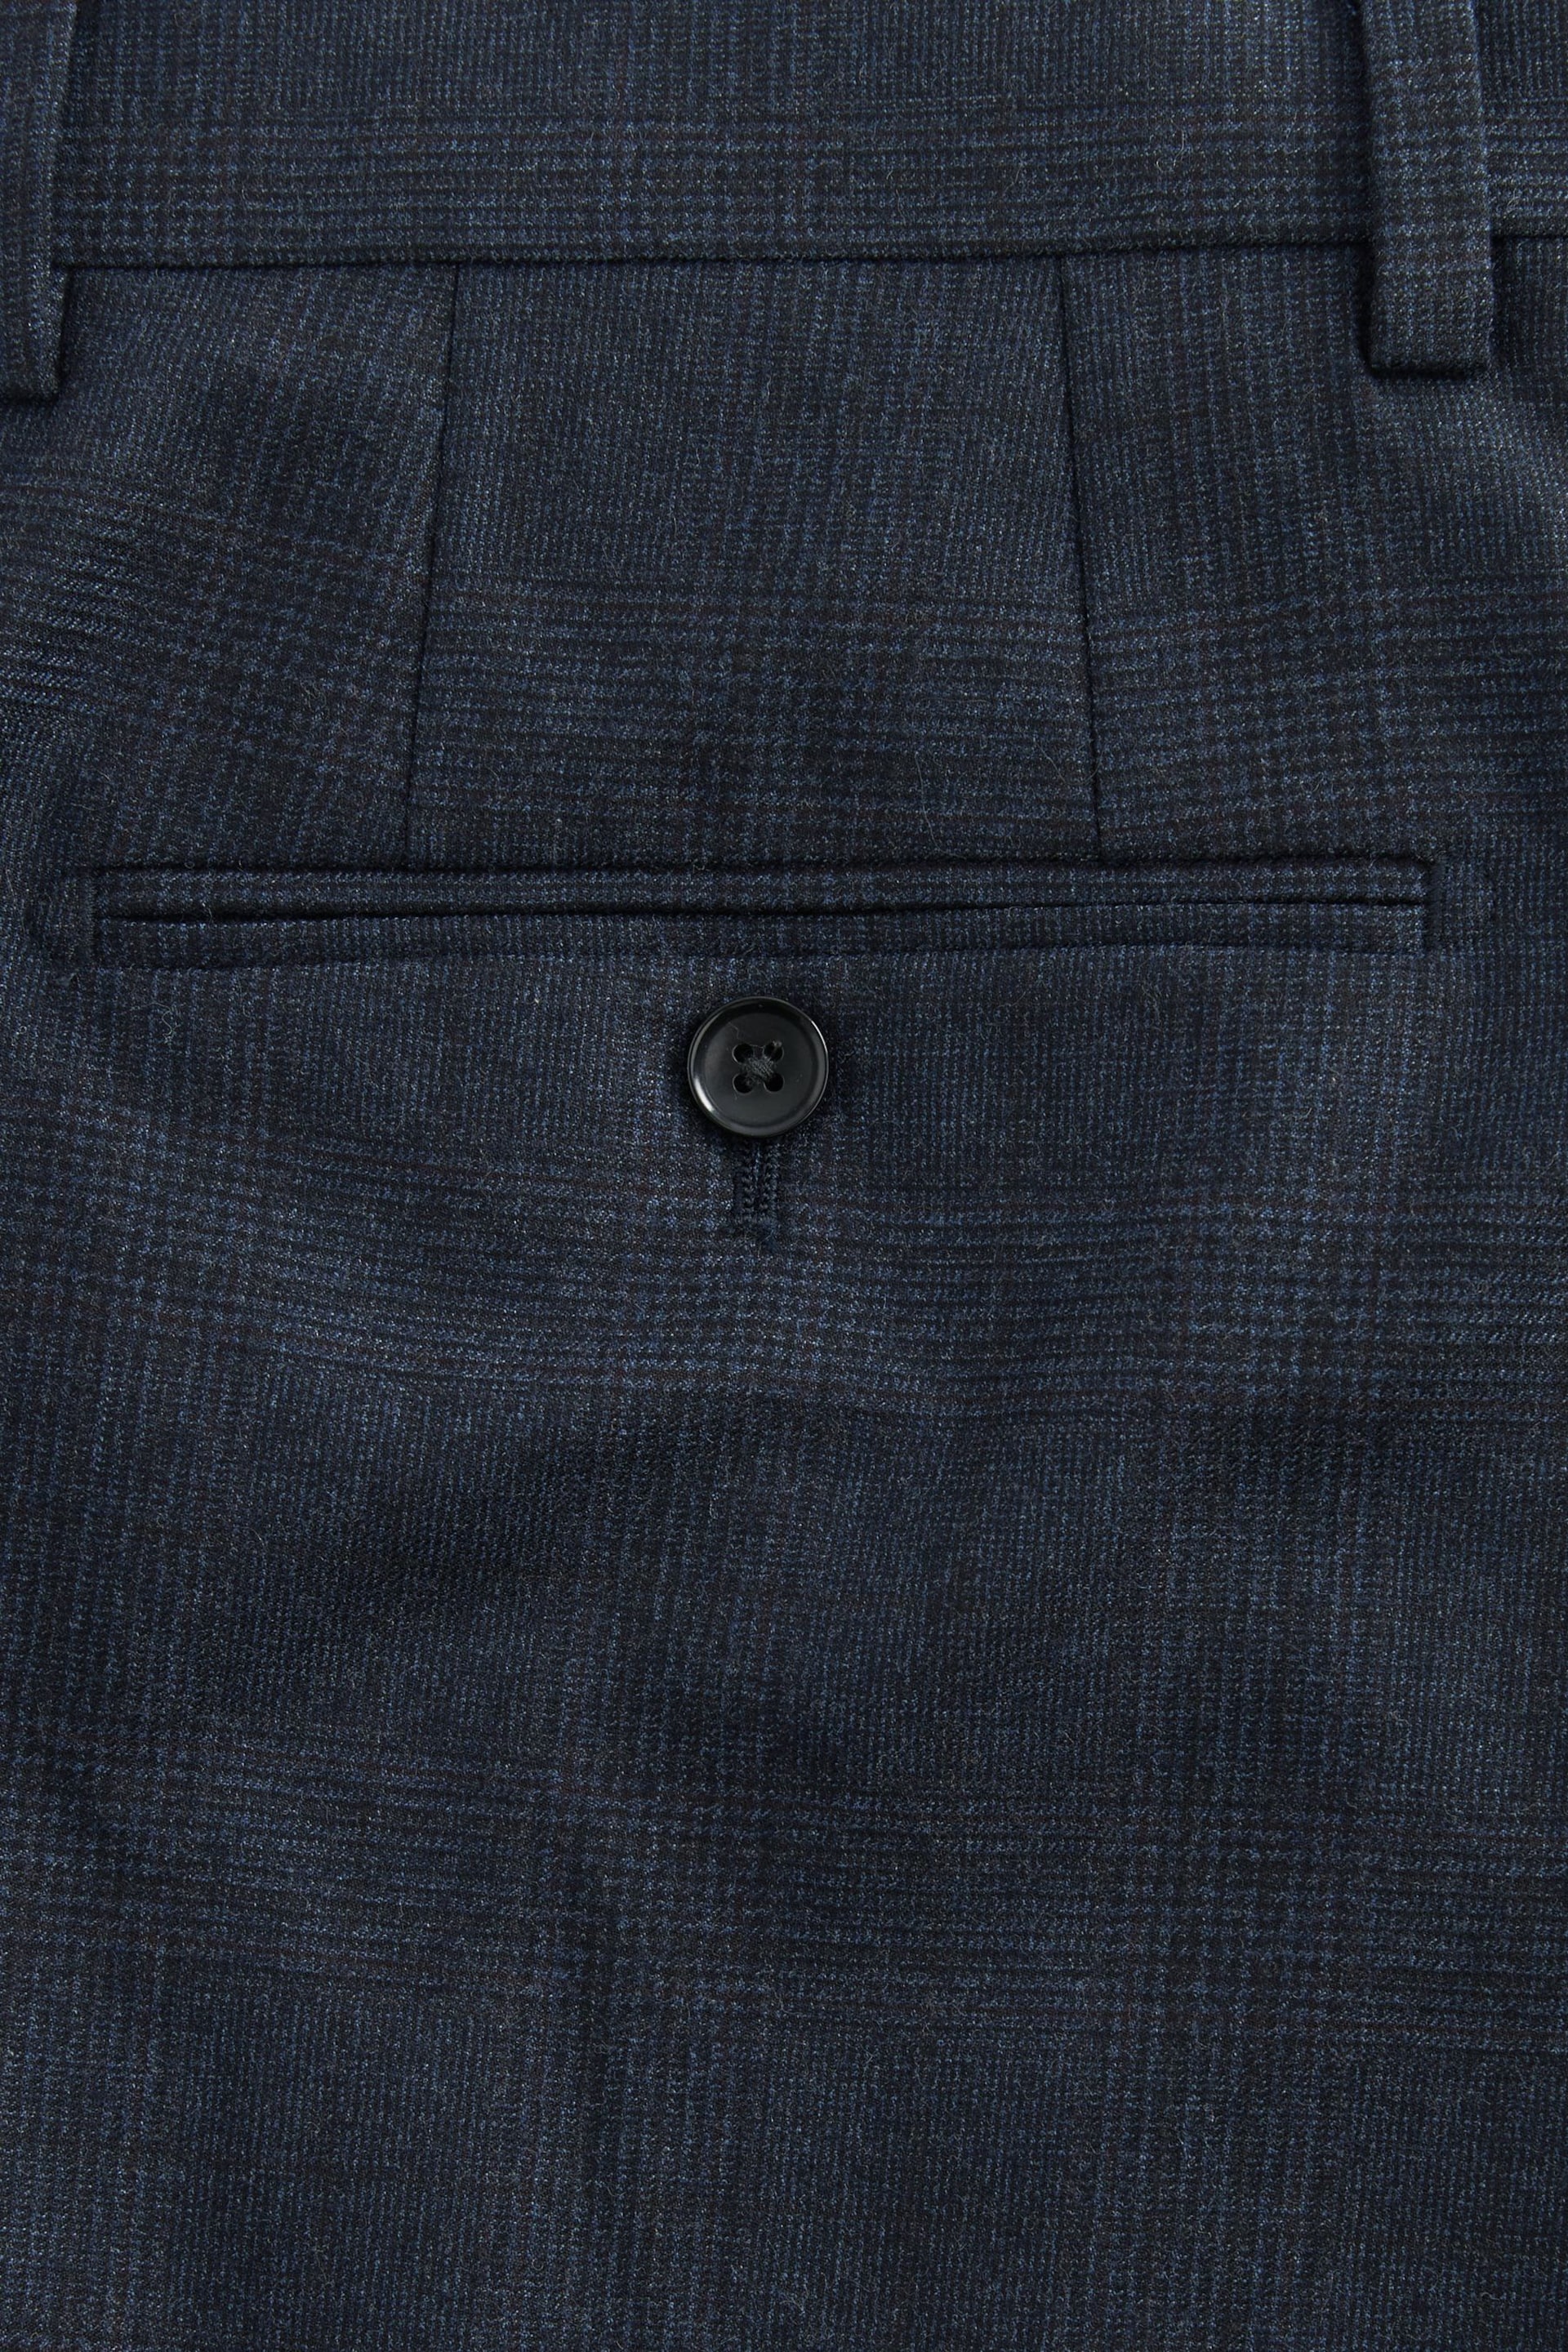 Navy Blue Slim Fit Signature Cerruti Wool Check Suit Trousers - Image 6 of 10